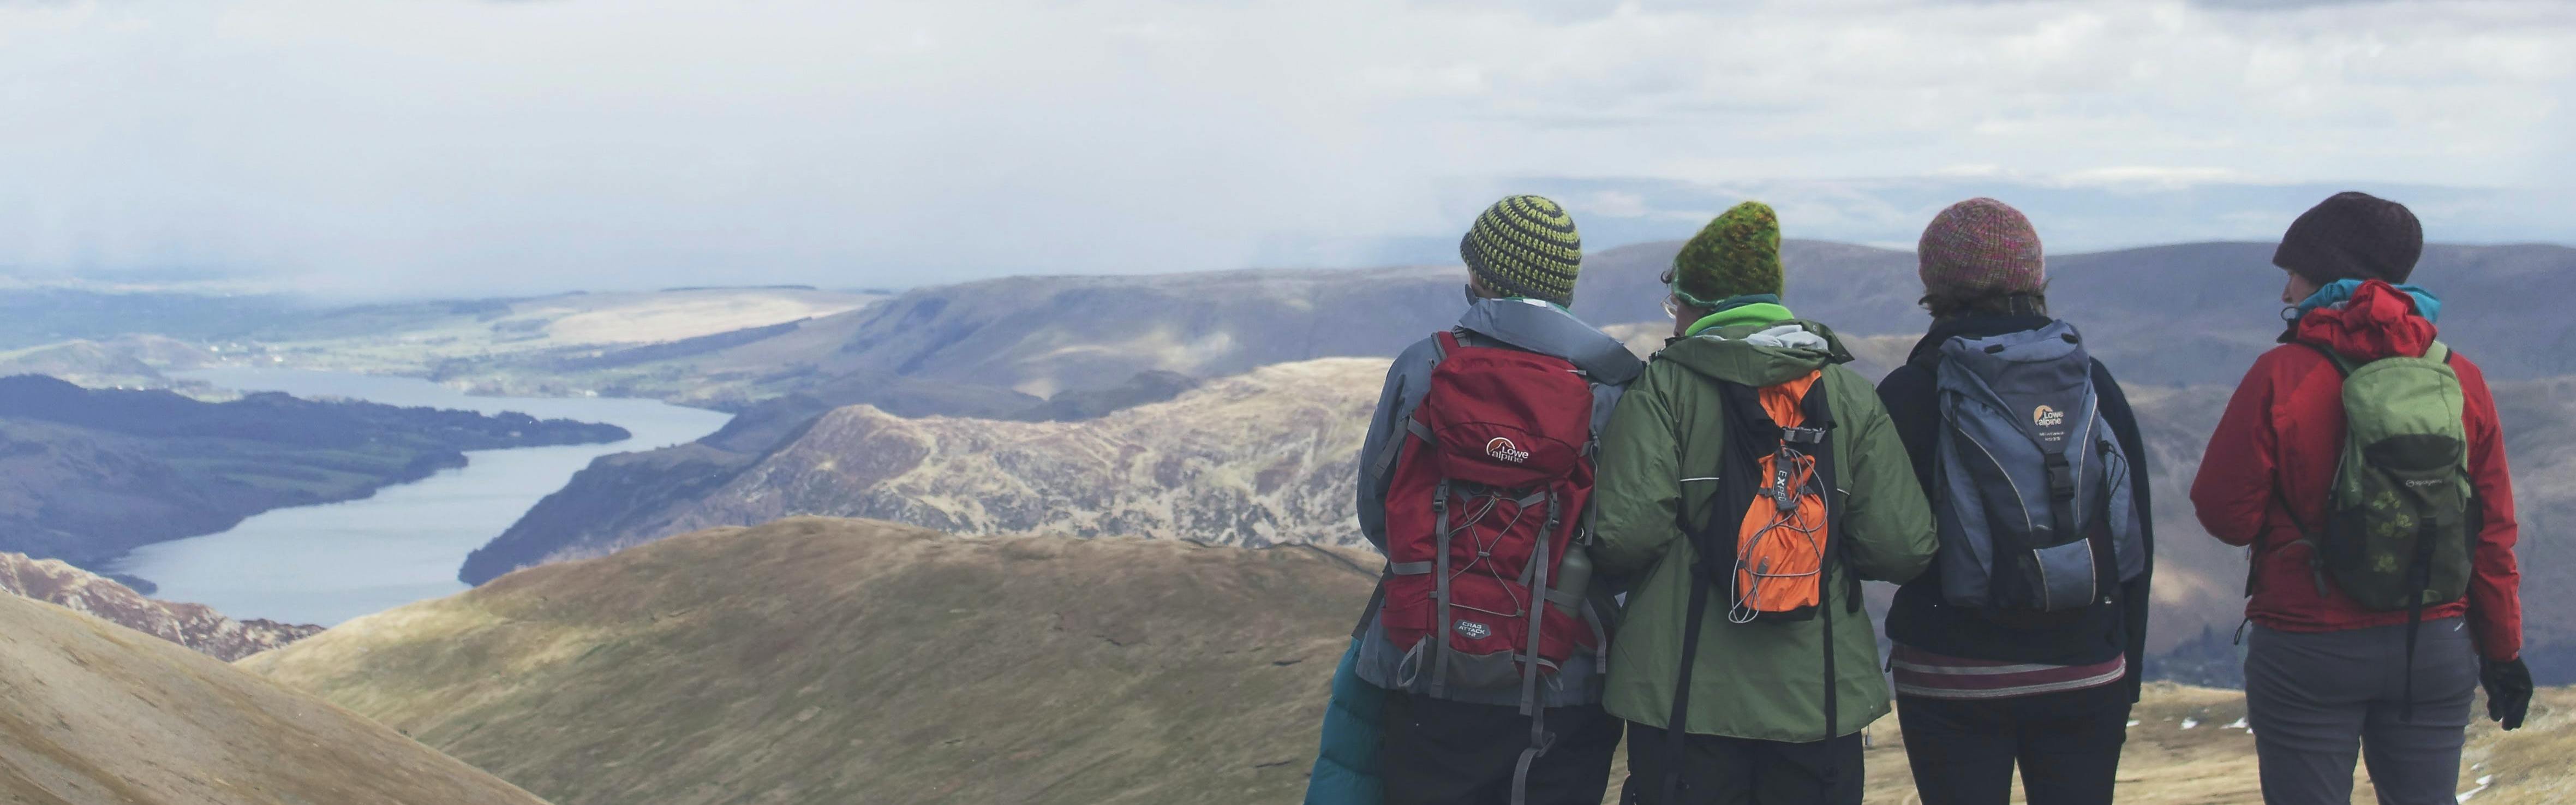 The 15 Best Hiking Clothing Brands